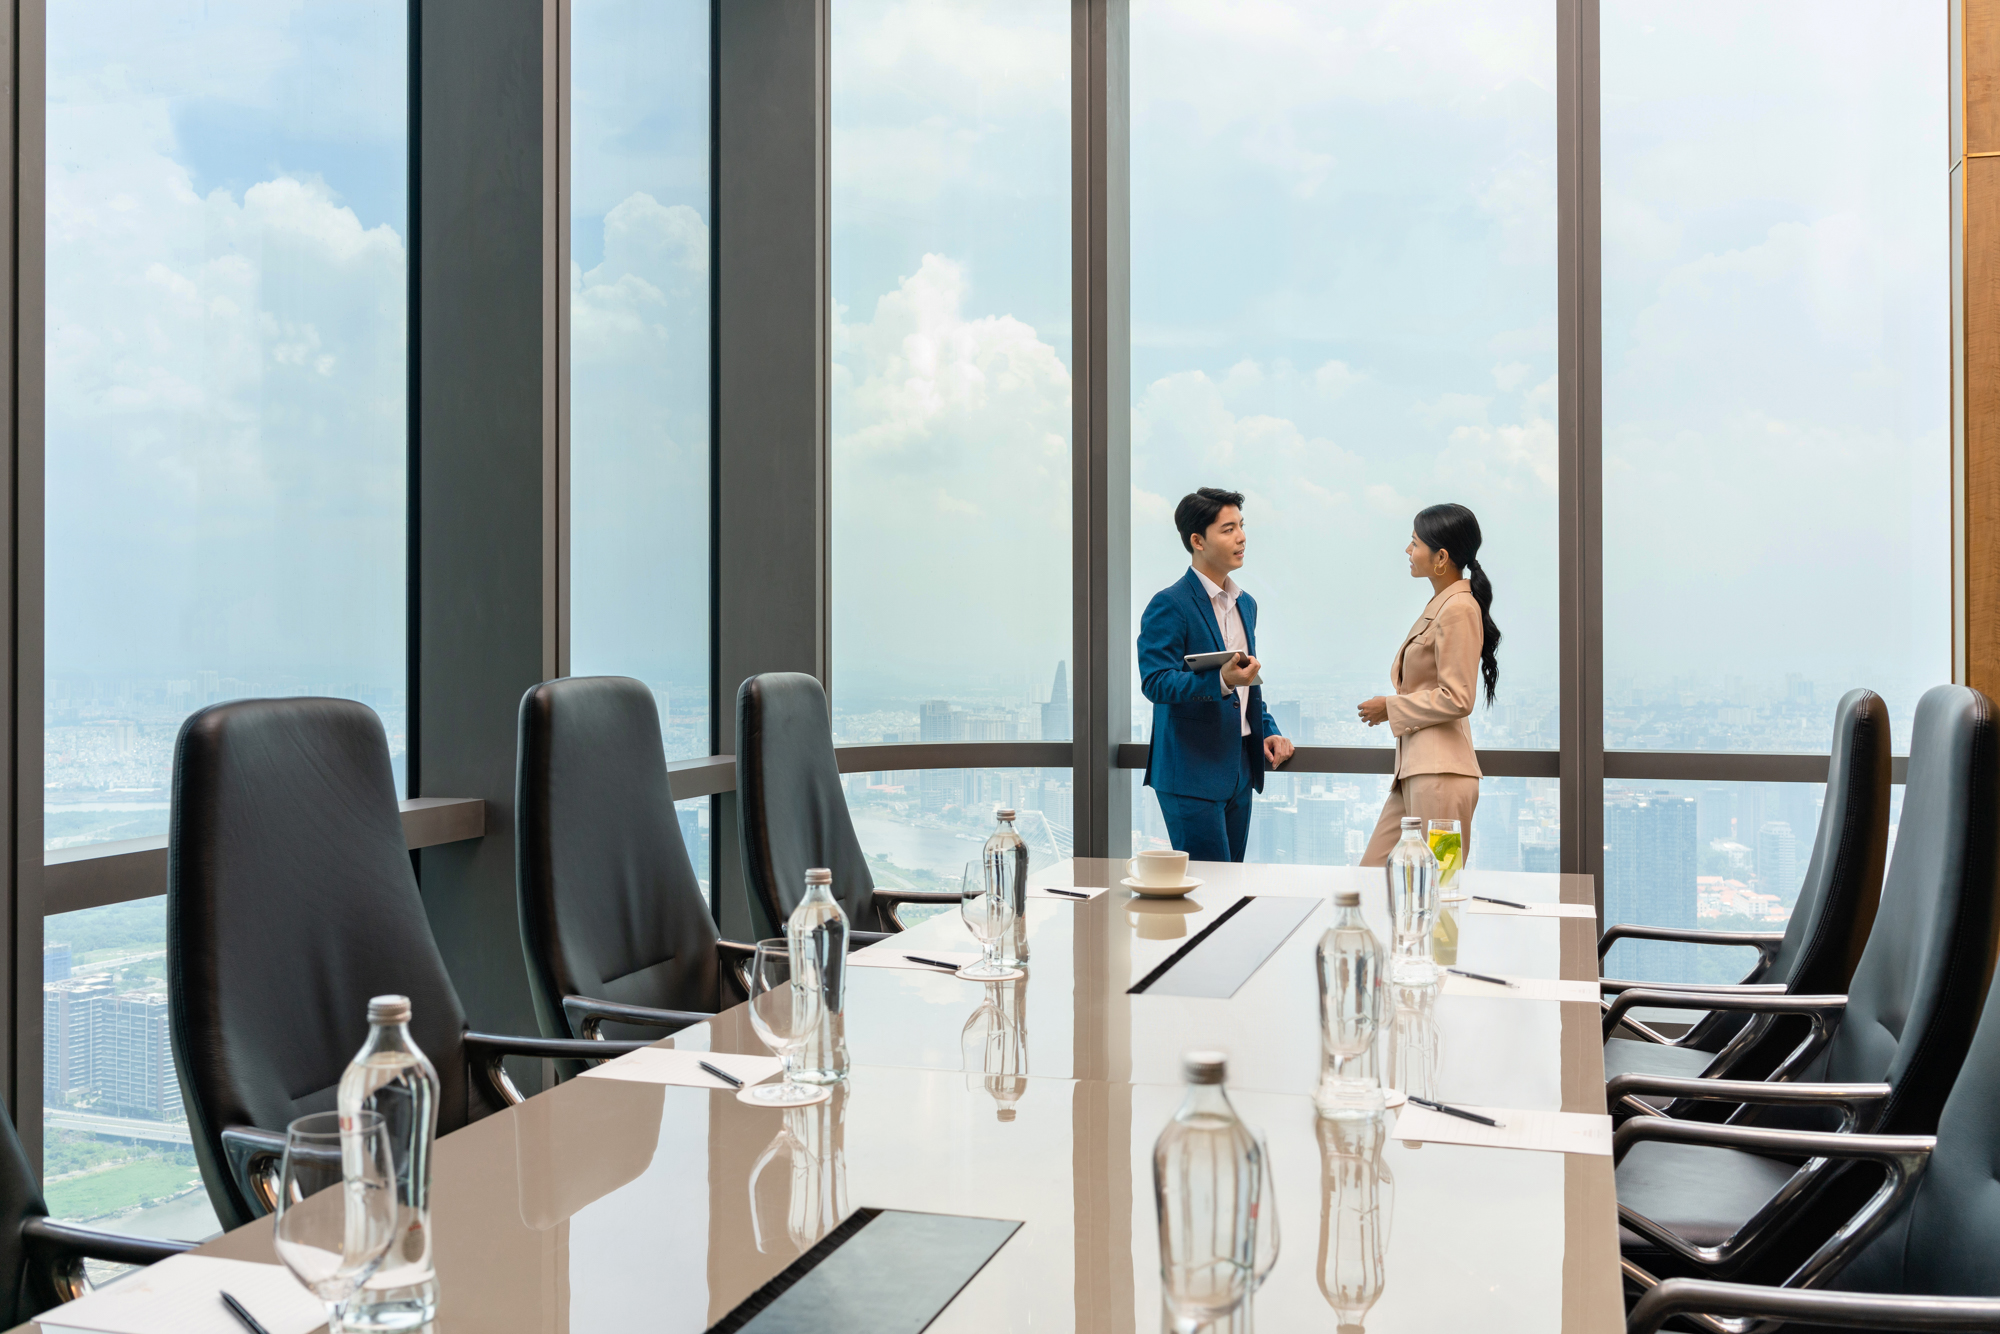 Business associates chat in a meeting room at a hotel with large window views